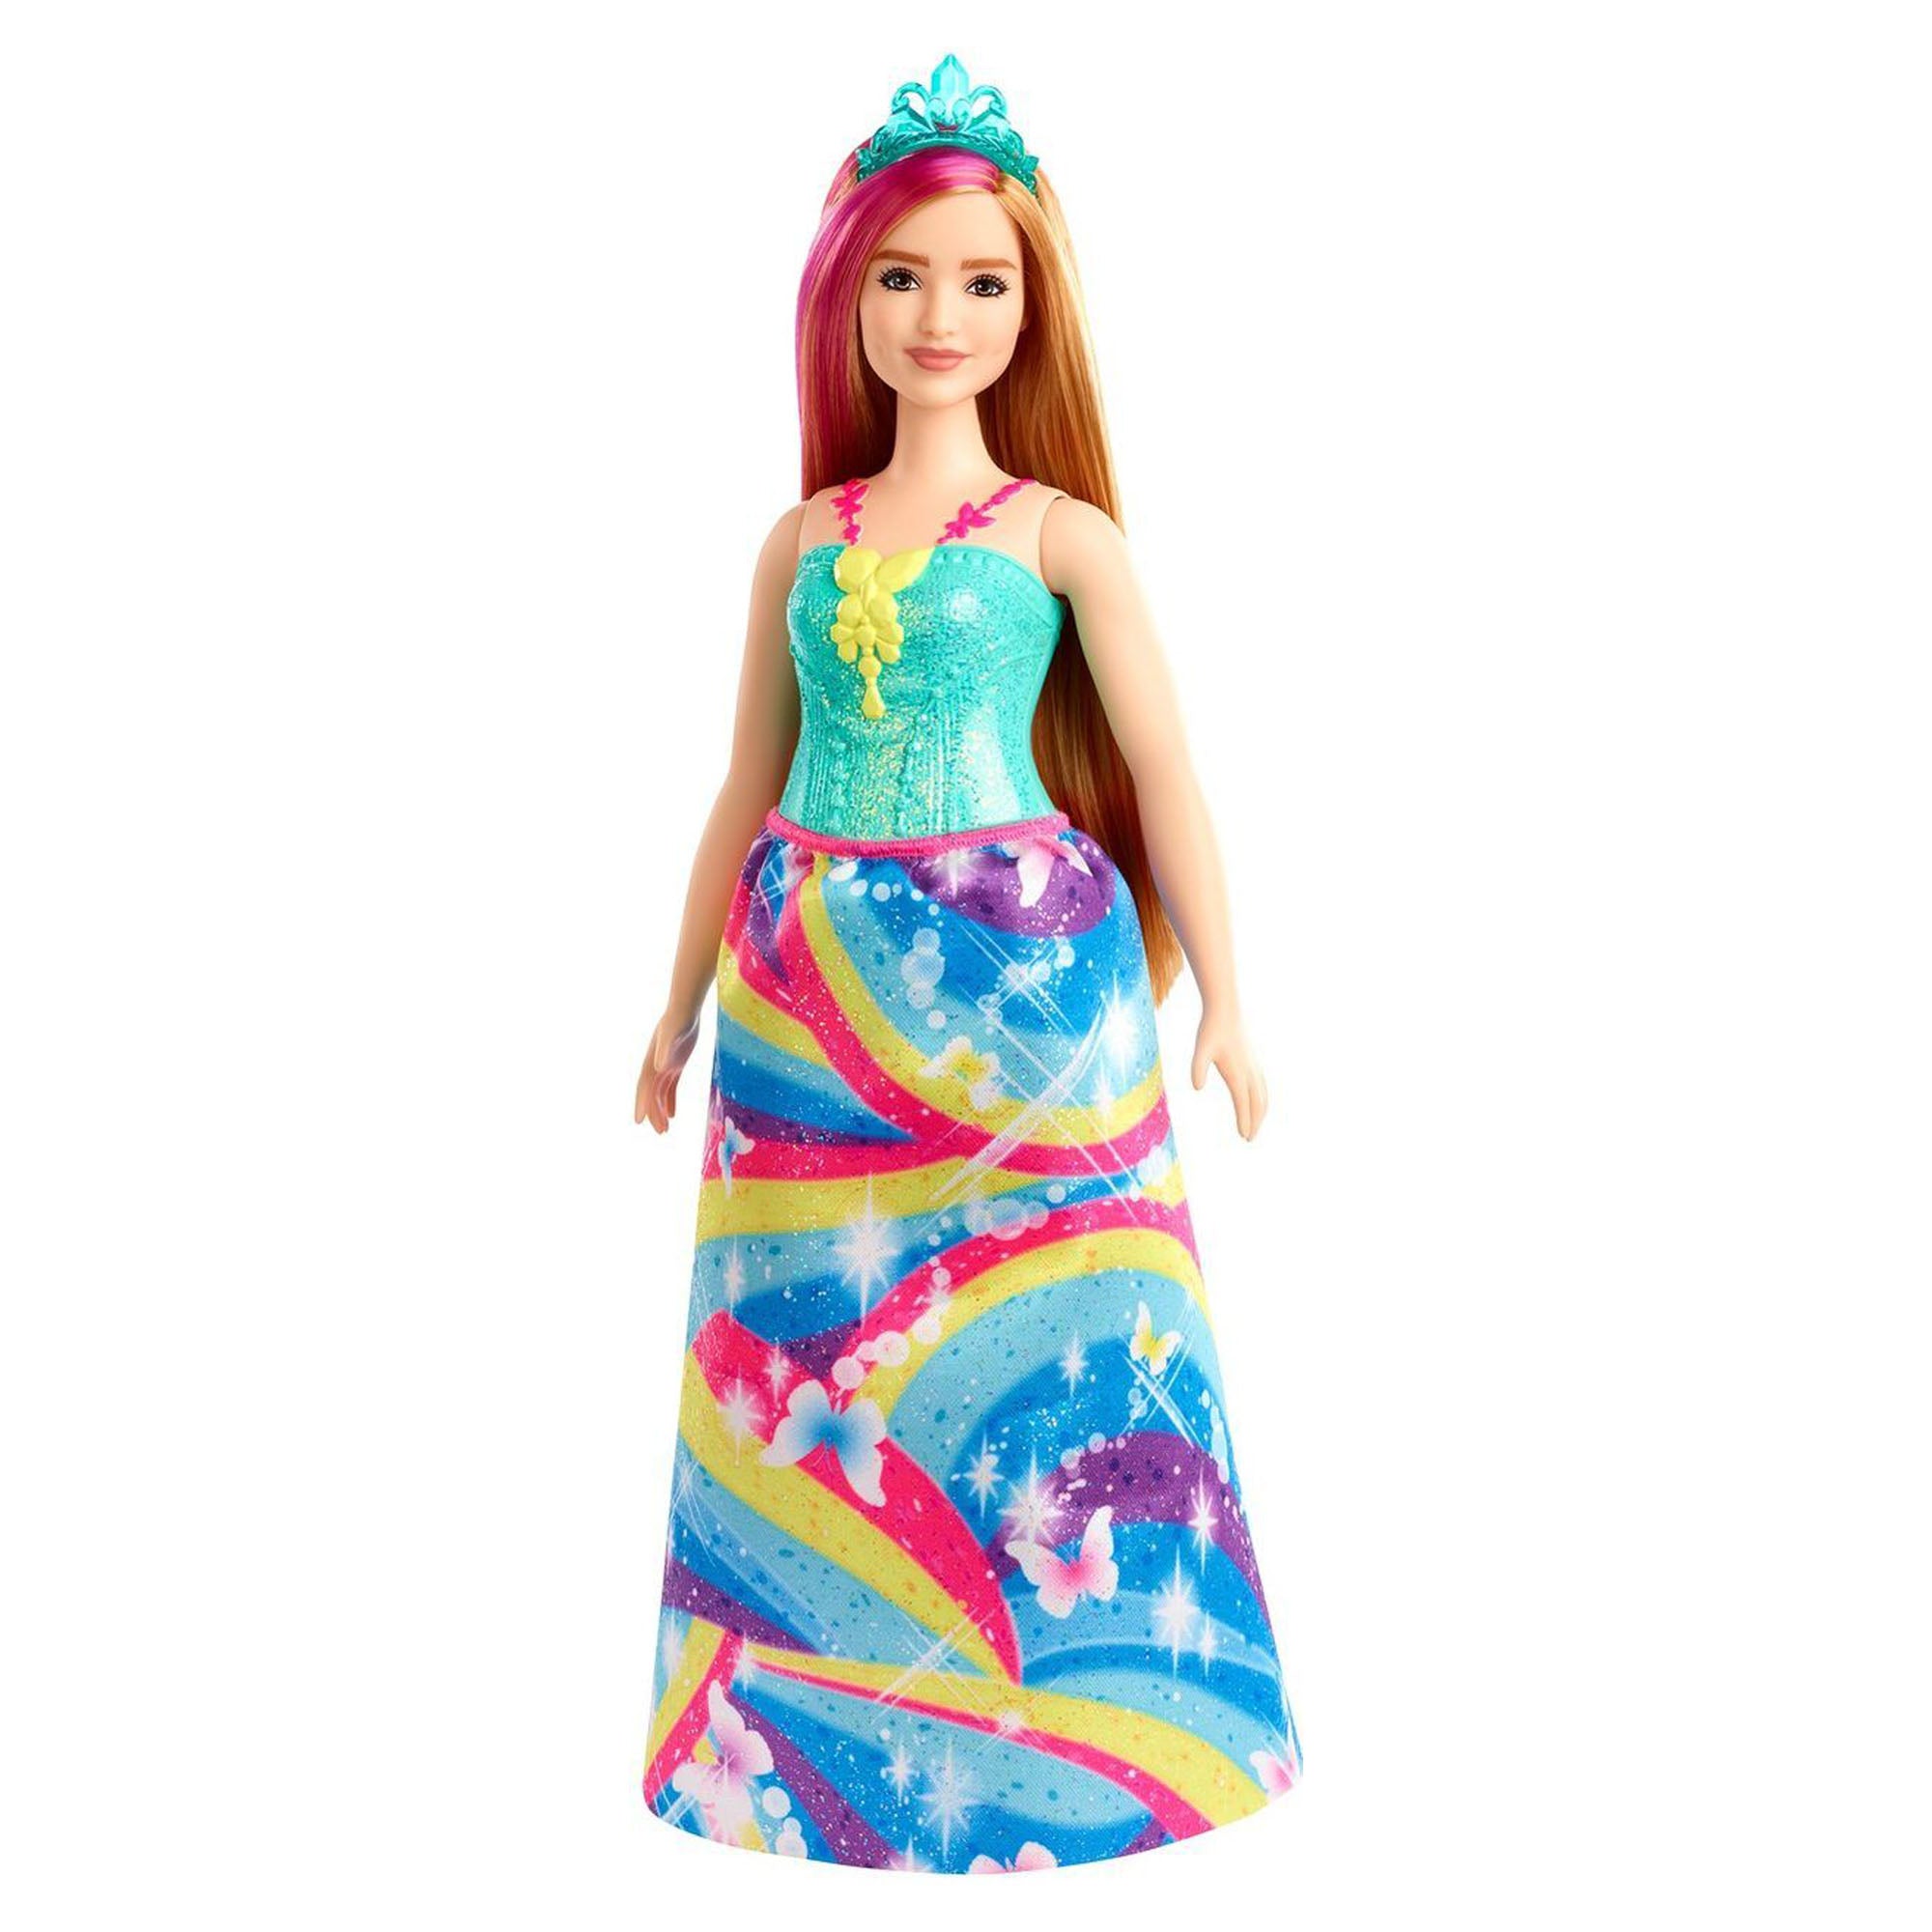  Barbie Dreamtopia Royal Doll with Petite Body